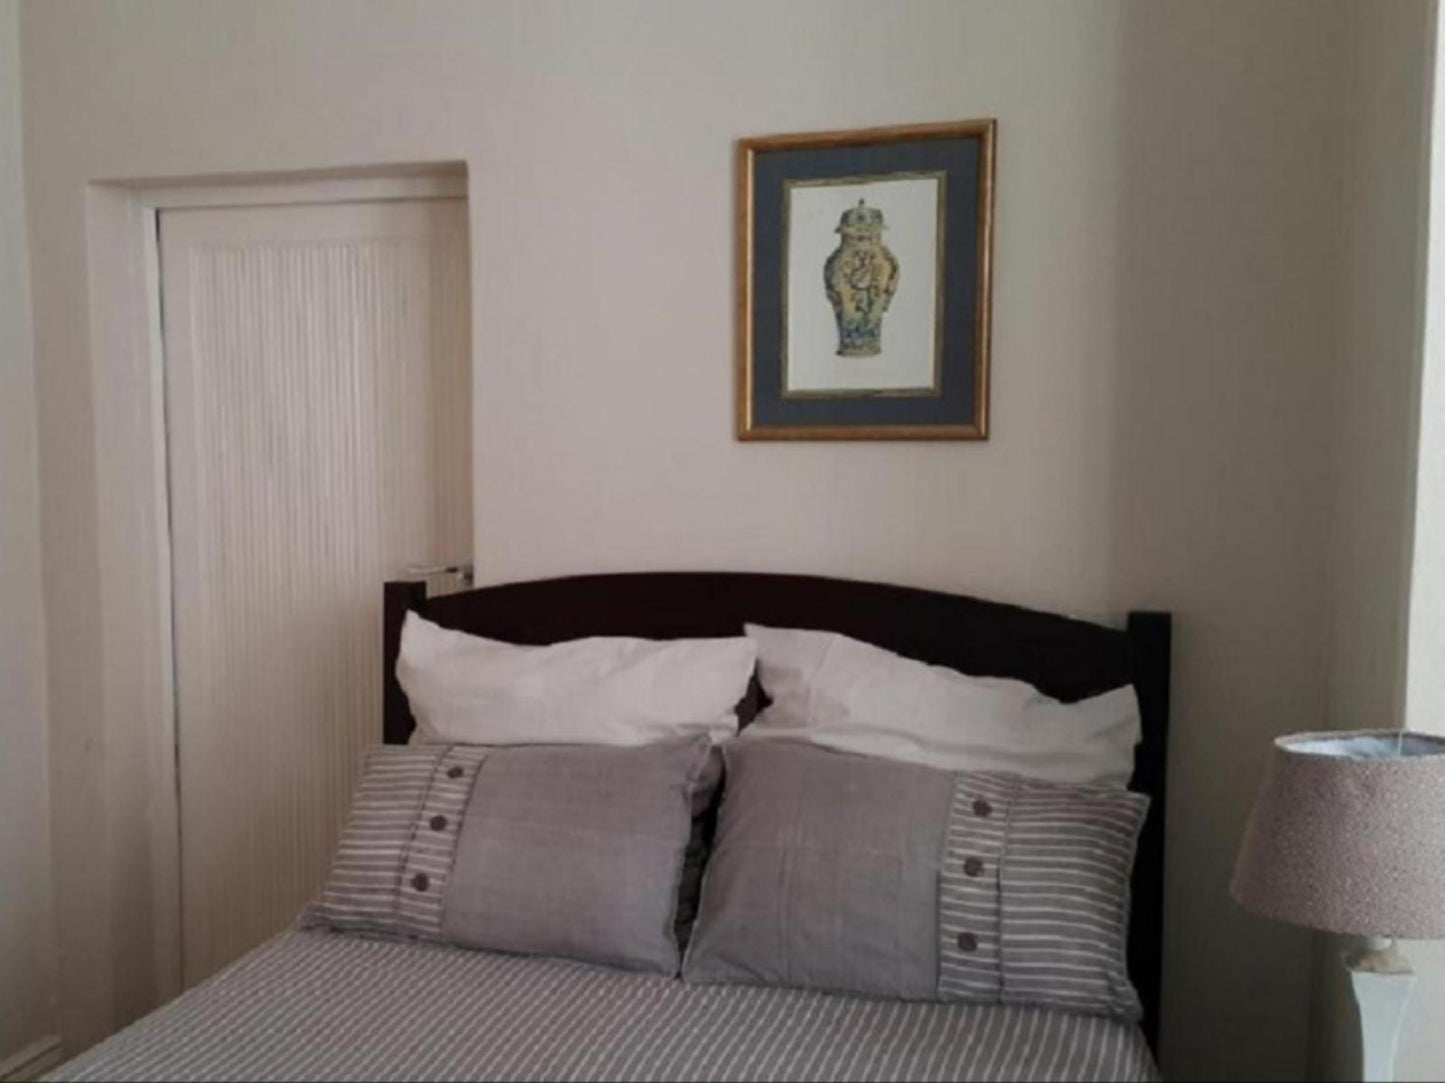 Double room en-suite @ Sommersby Guest House